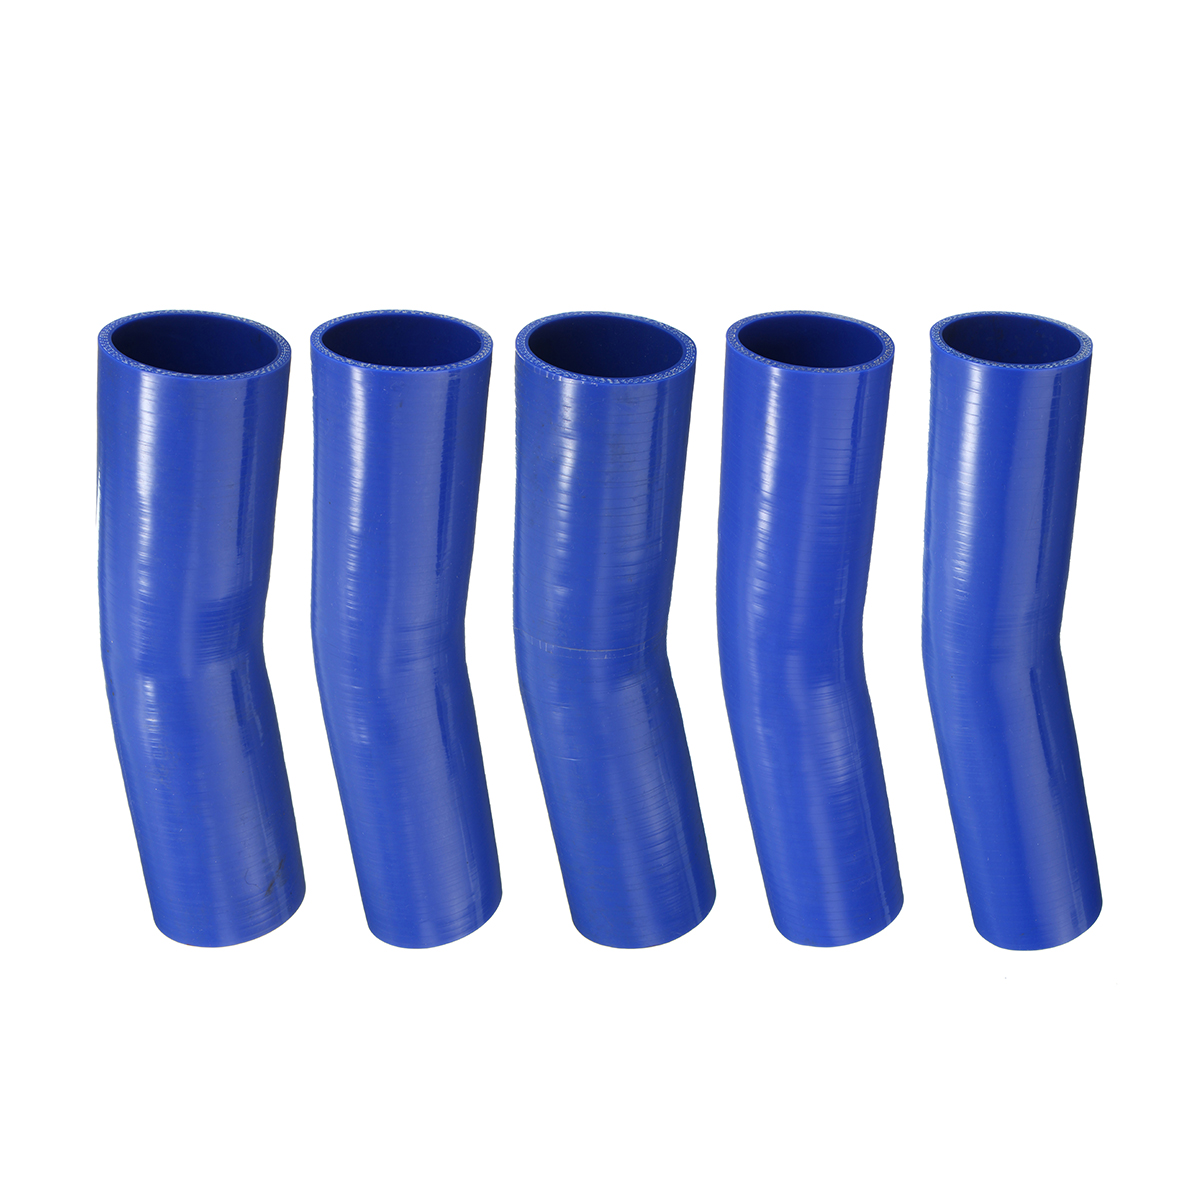 150mm-Silicone-Hose-Rubber-15-Degree-Elbow-Bend-Hose-Air-Water-Coolant-Joiner-Pipe-Tube-1587657-1